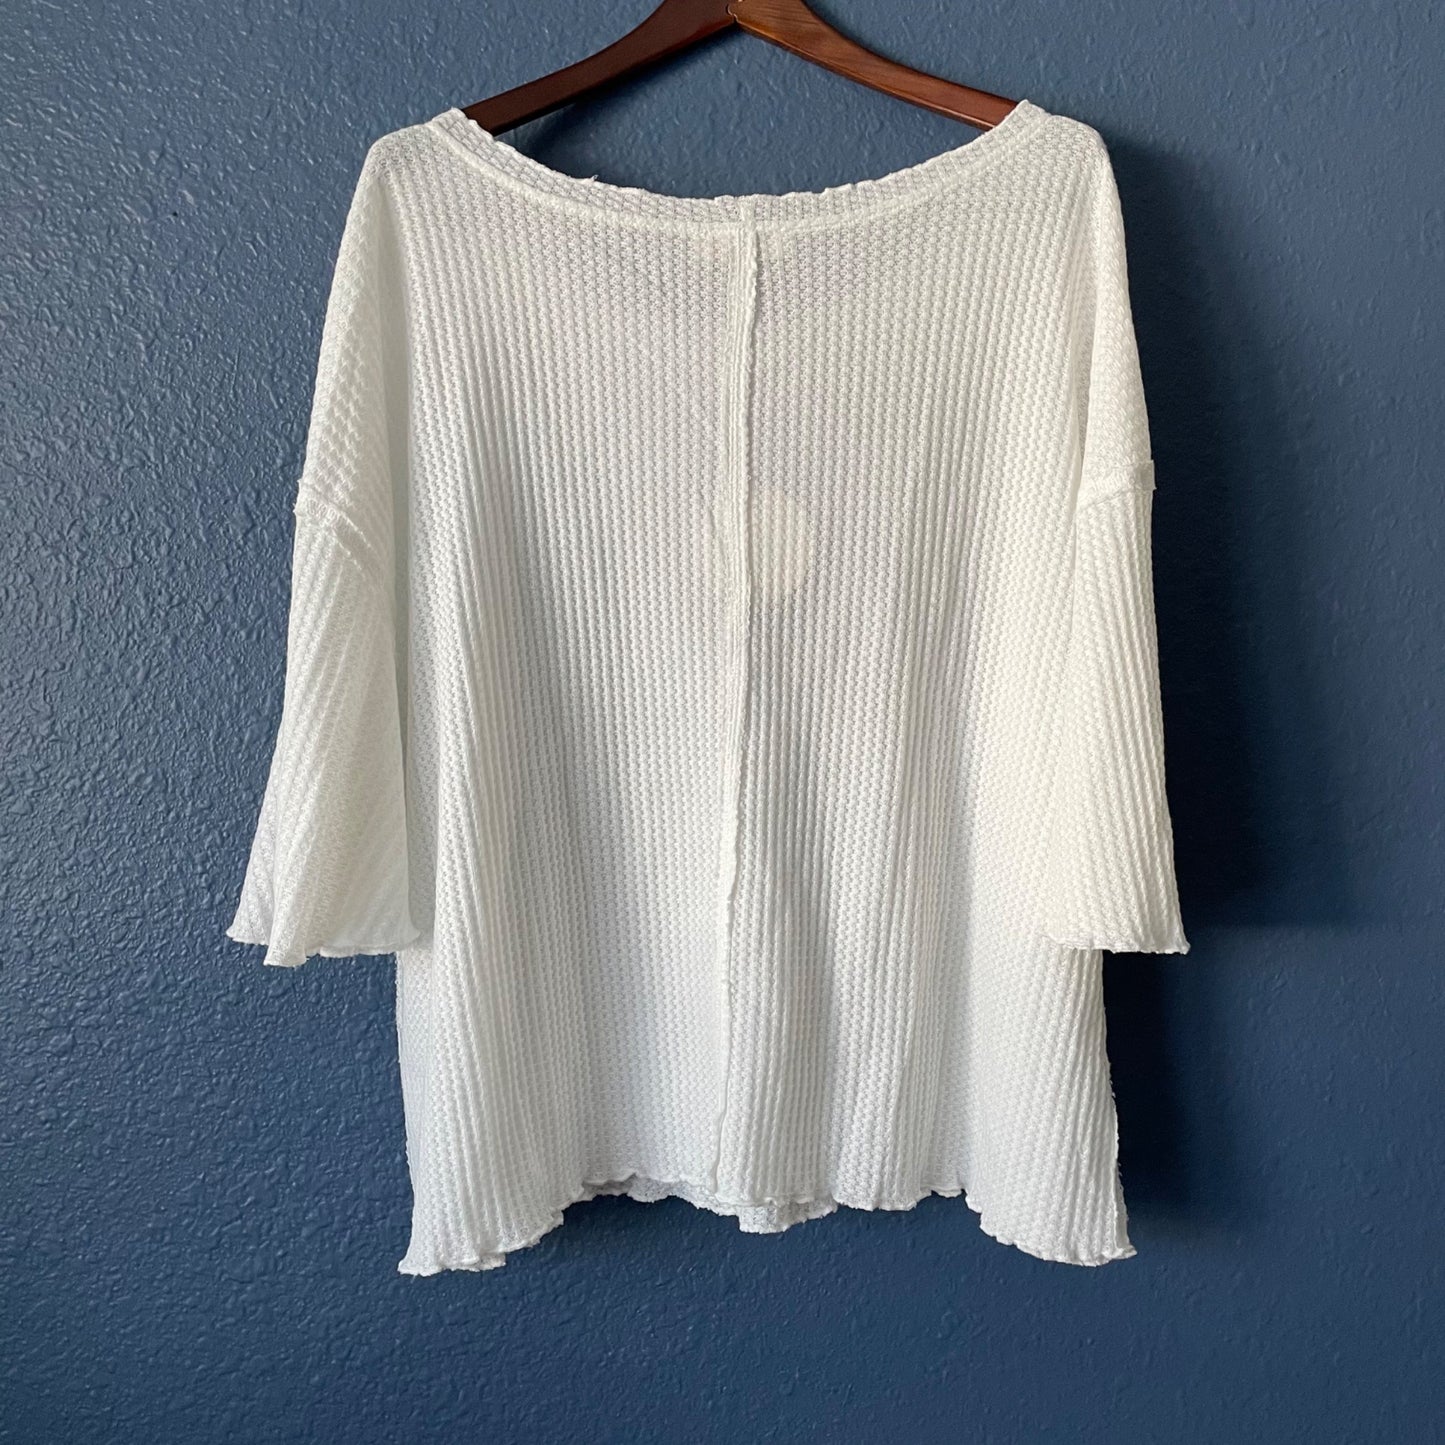 NWT Umgee White Ruffle Sleeve Ribbed Oversize Top Women's Size 1XL 90's Y2K